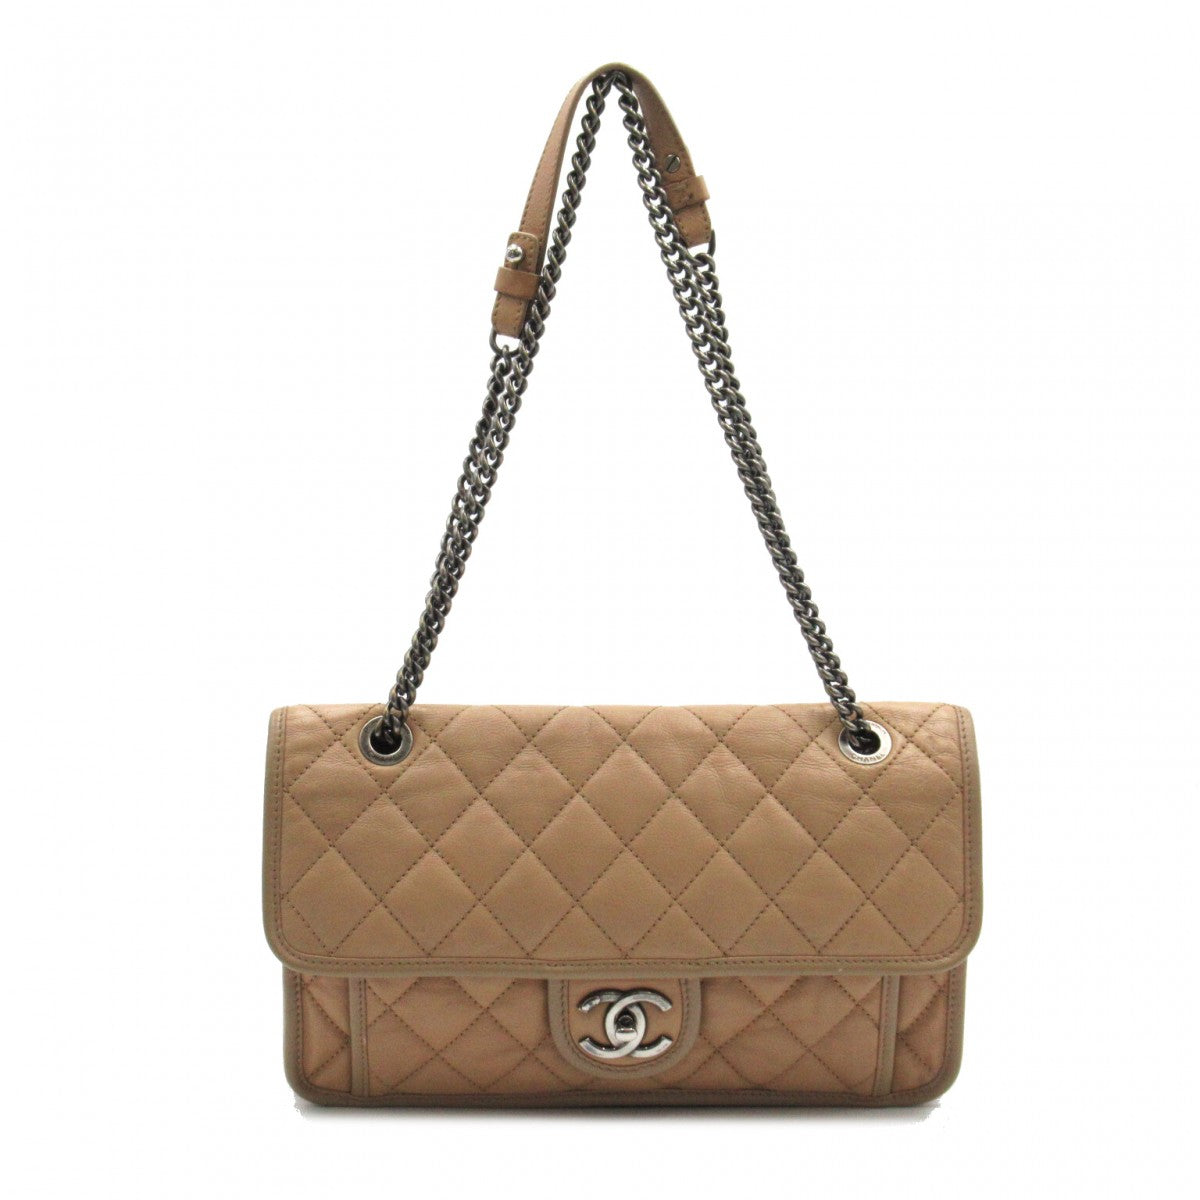 CC Quilted Leather French Riviera Flap Bag